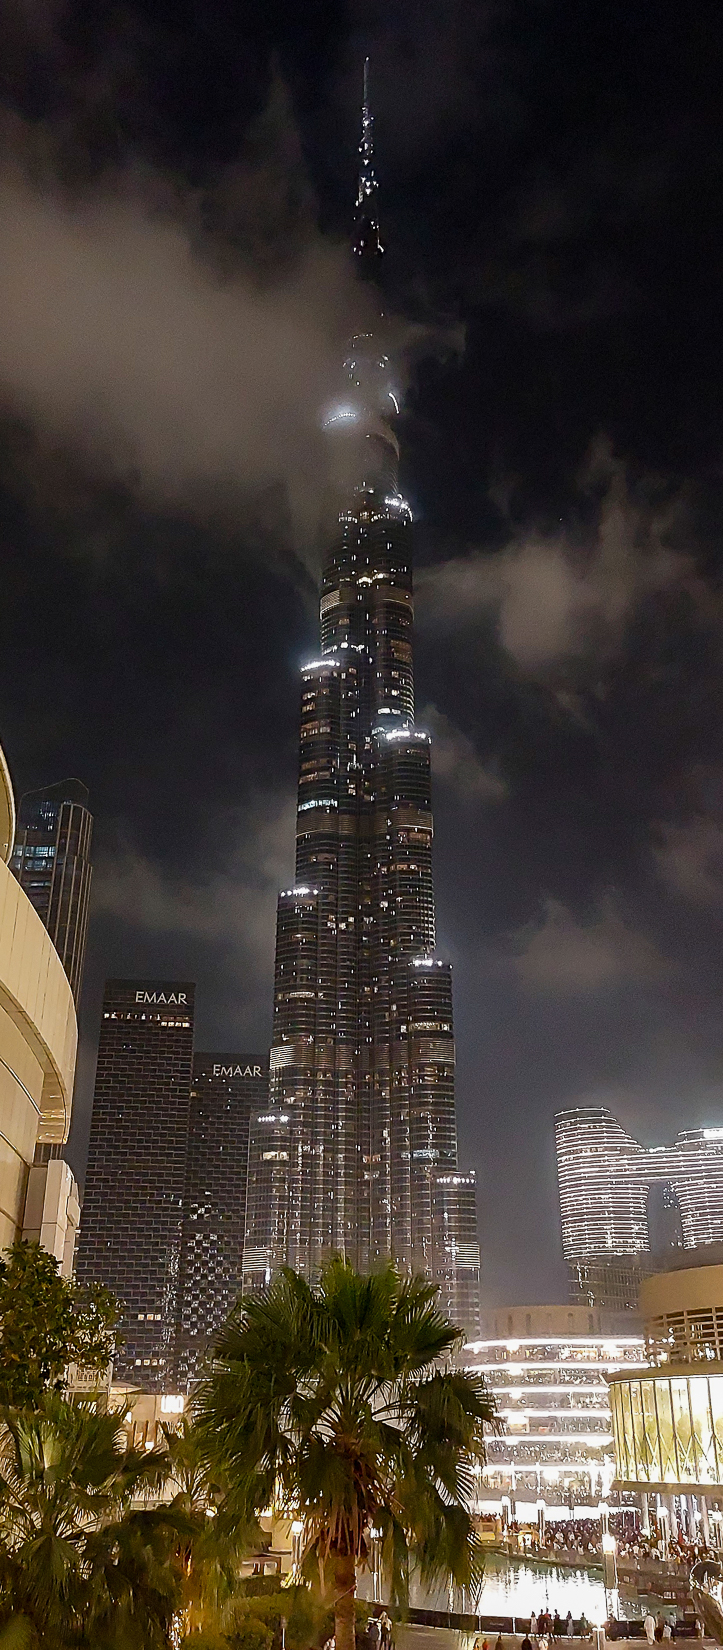 <span  class="uc_style_uc_tiles_grid_image_elementor_uc_items_attribute_title" style="color:#ffffff;">Burj Kalifah at night time</span>